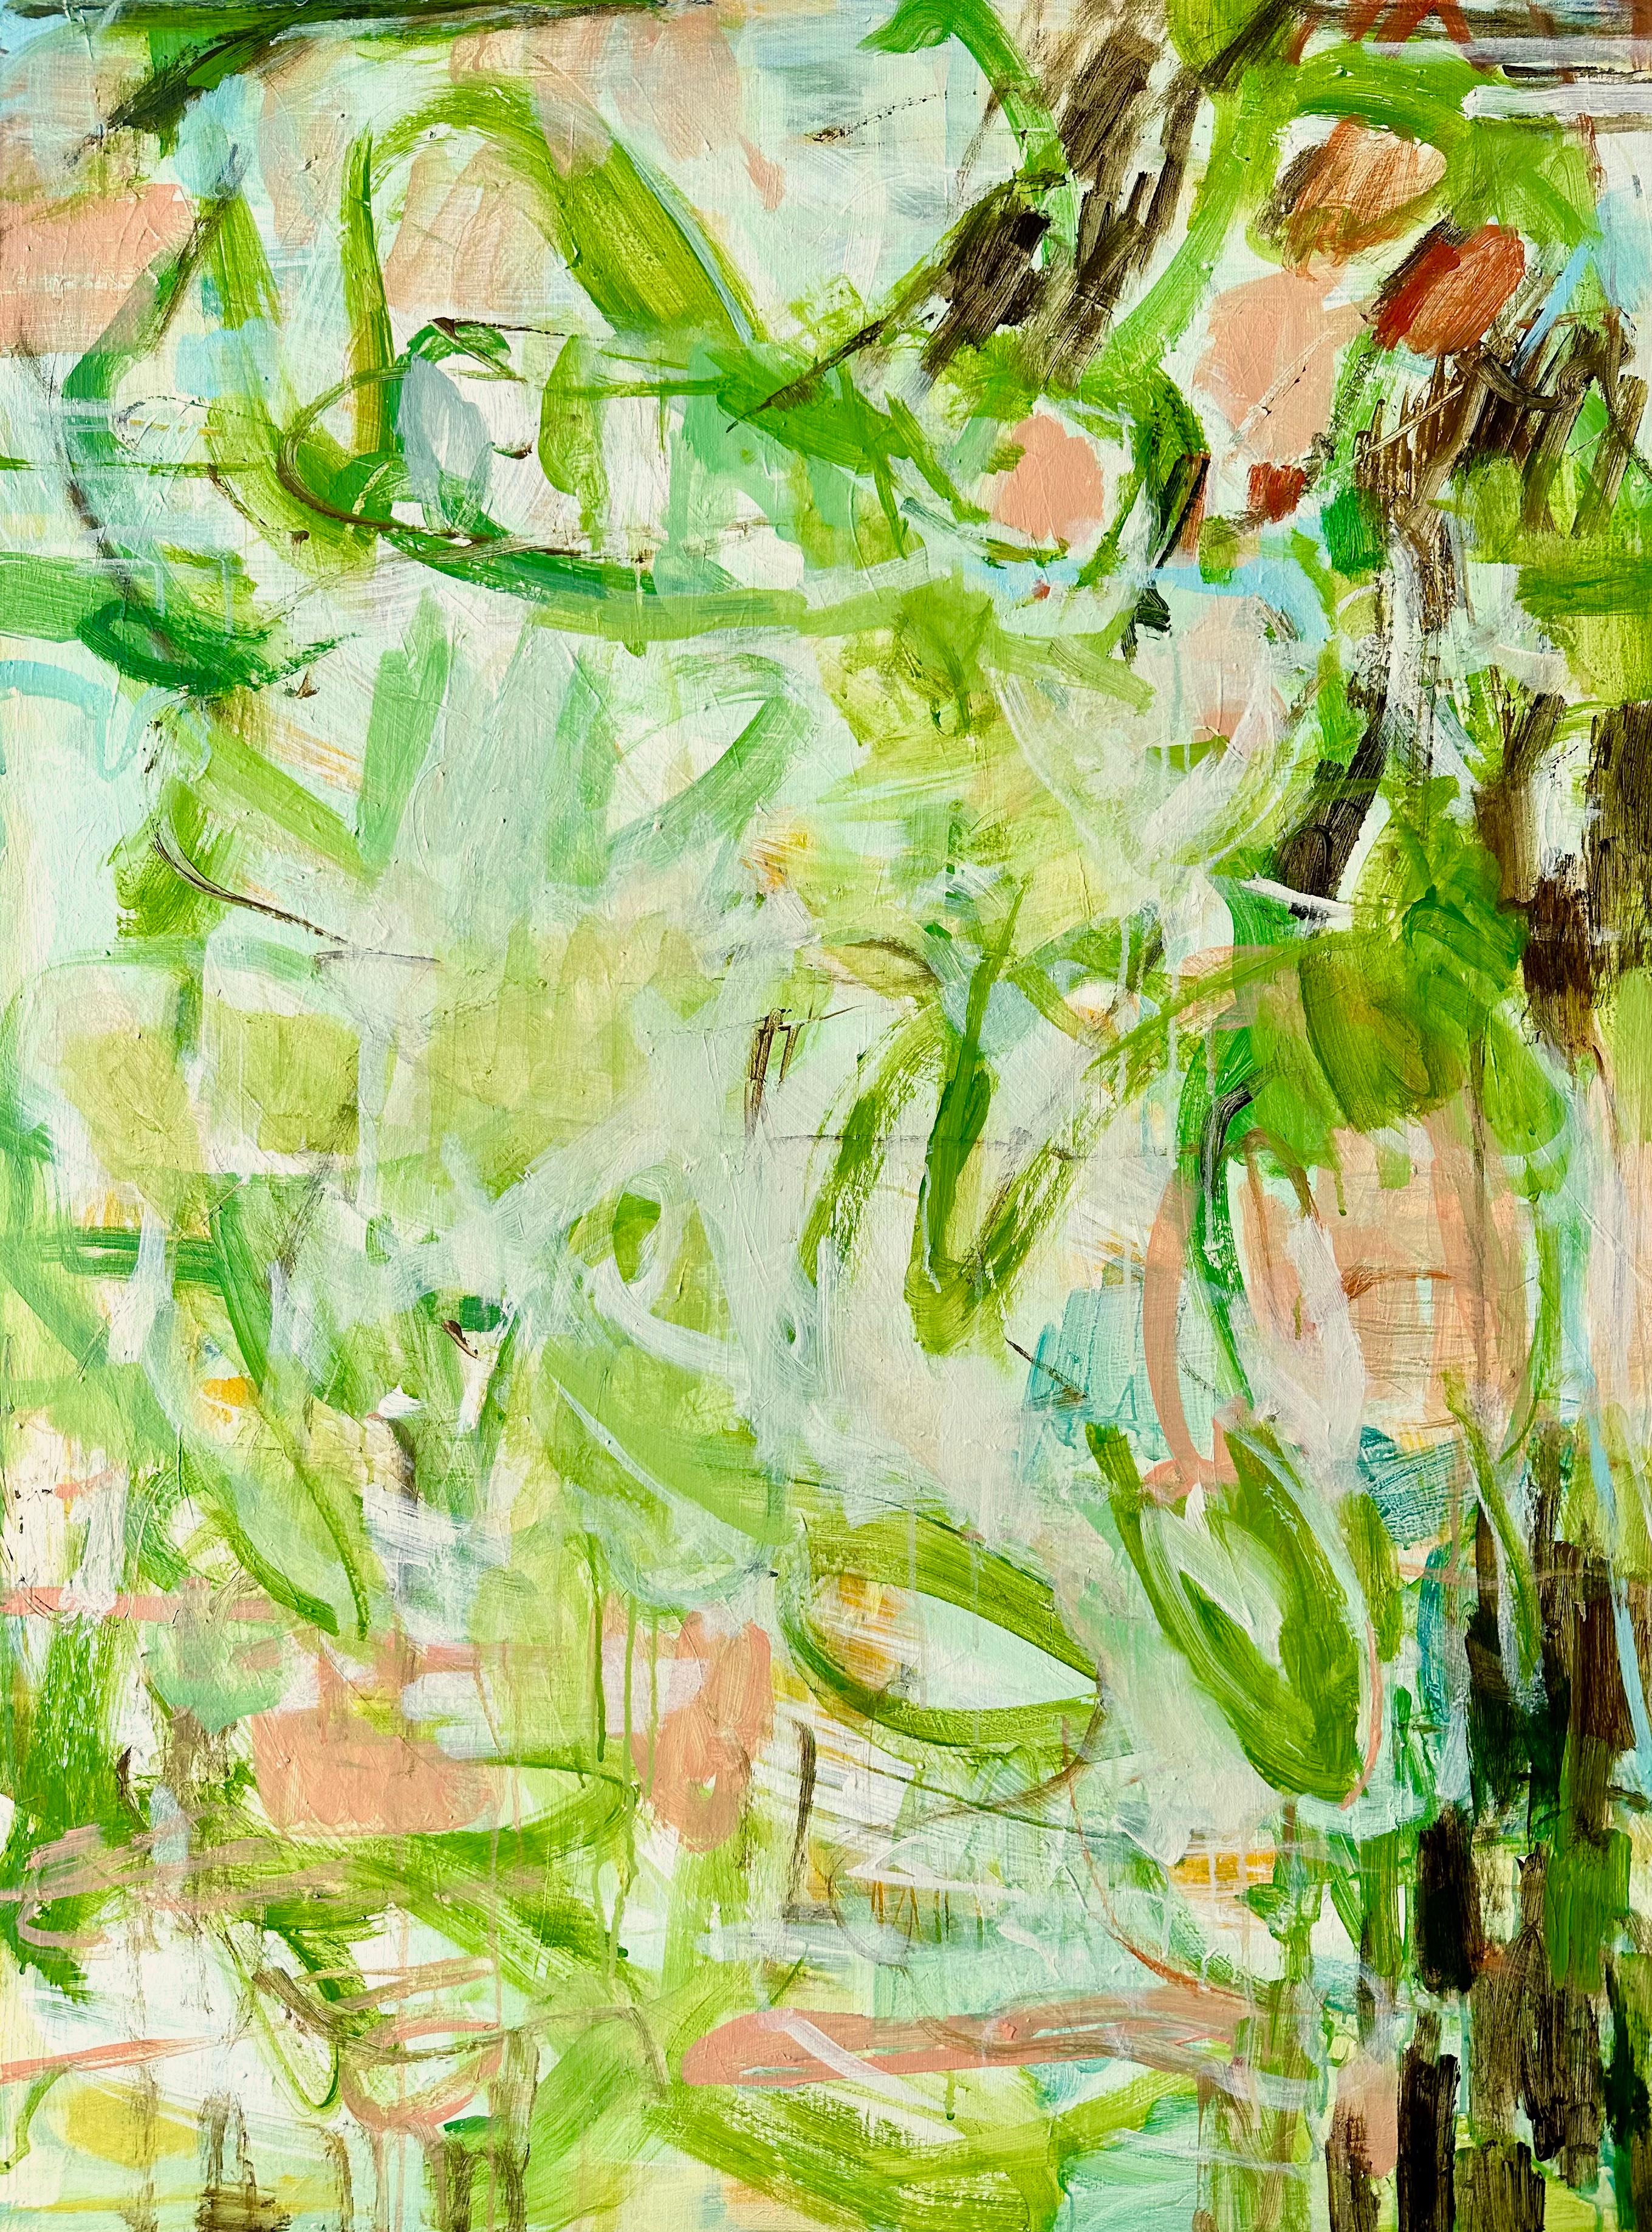   Spring Green is an original abstract painting by Janet Keith. Spring Green is an expressive, gestural painting evoking a feeling of movement, light and spring foliage unfurling. The painting is built up of veils of colour, scribbles and